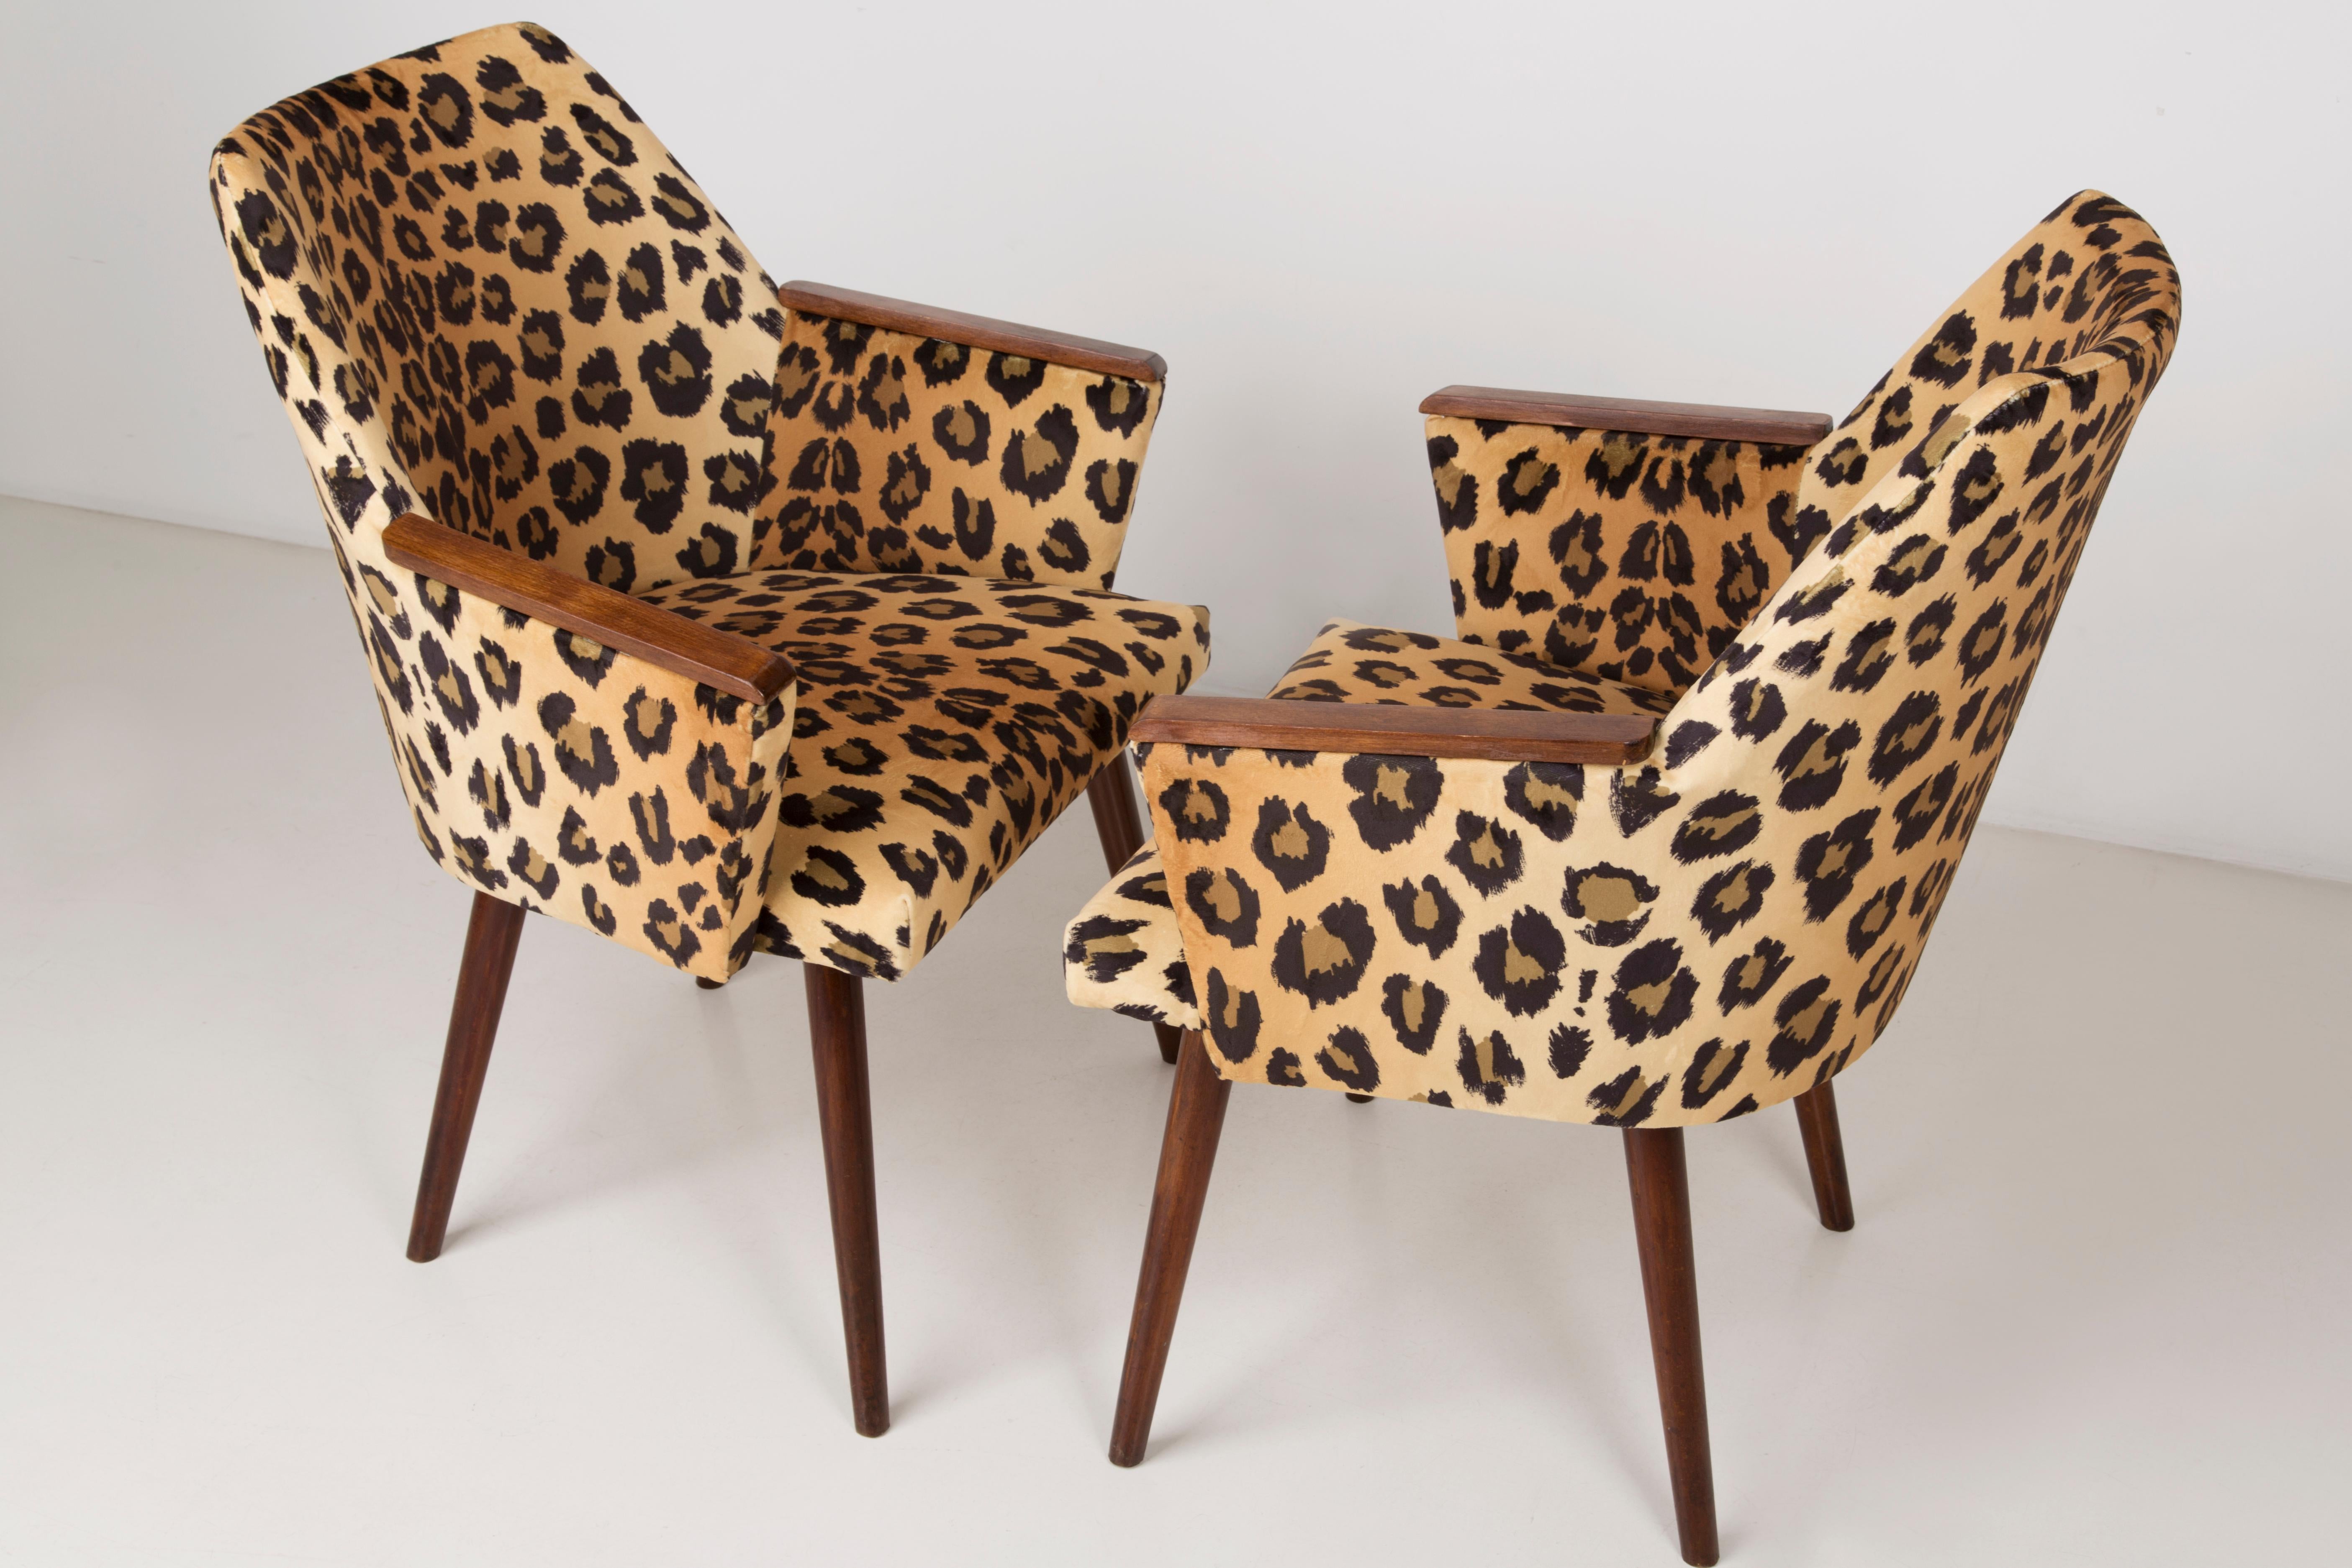 Set of Two Mid-Century Modern Leopard Print Chairs, 1960s, Germany 7